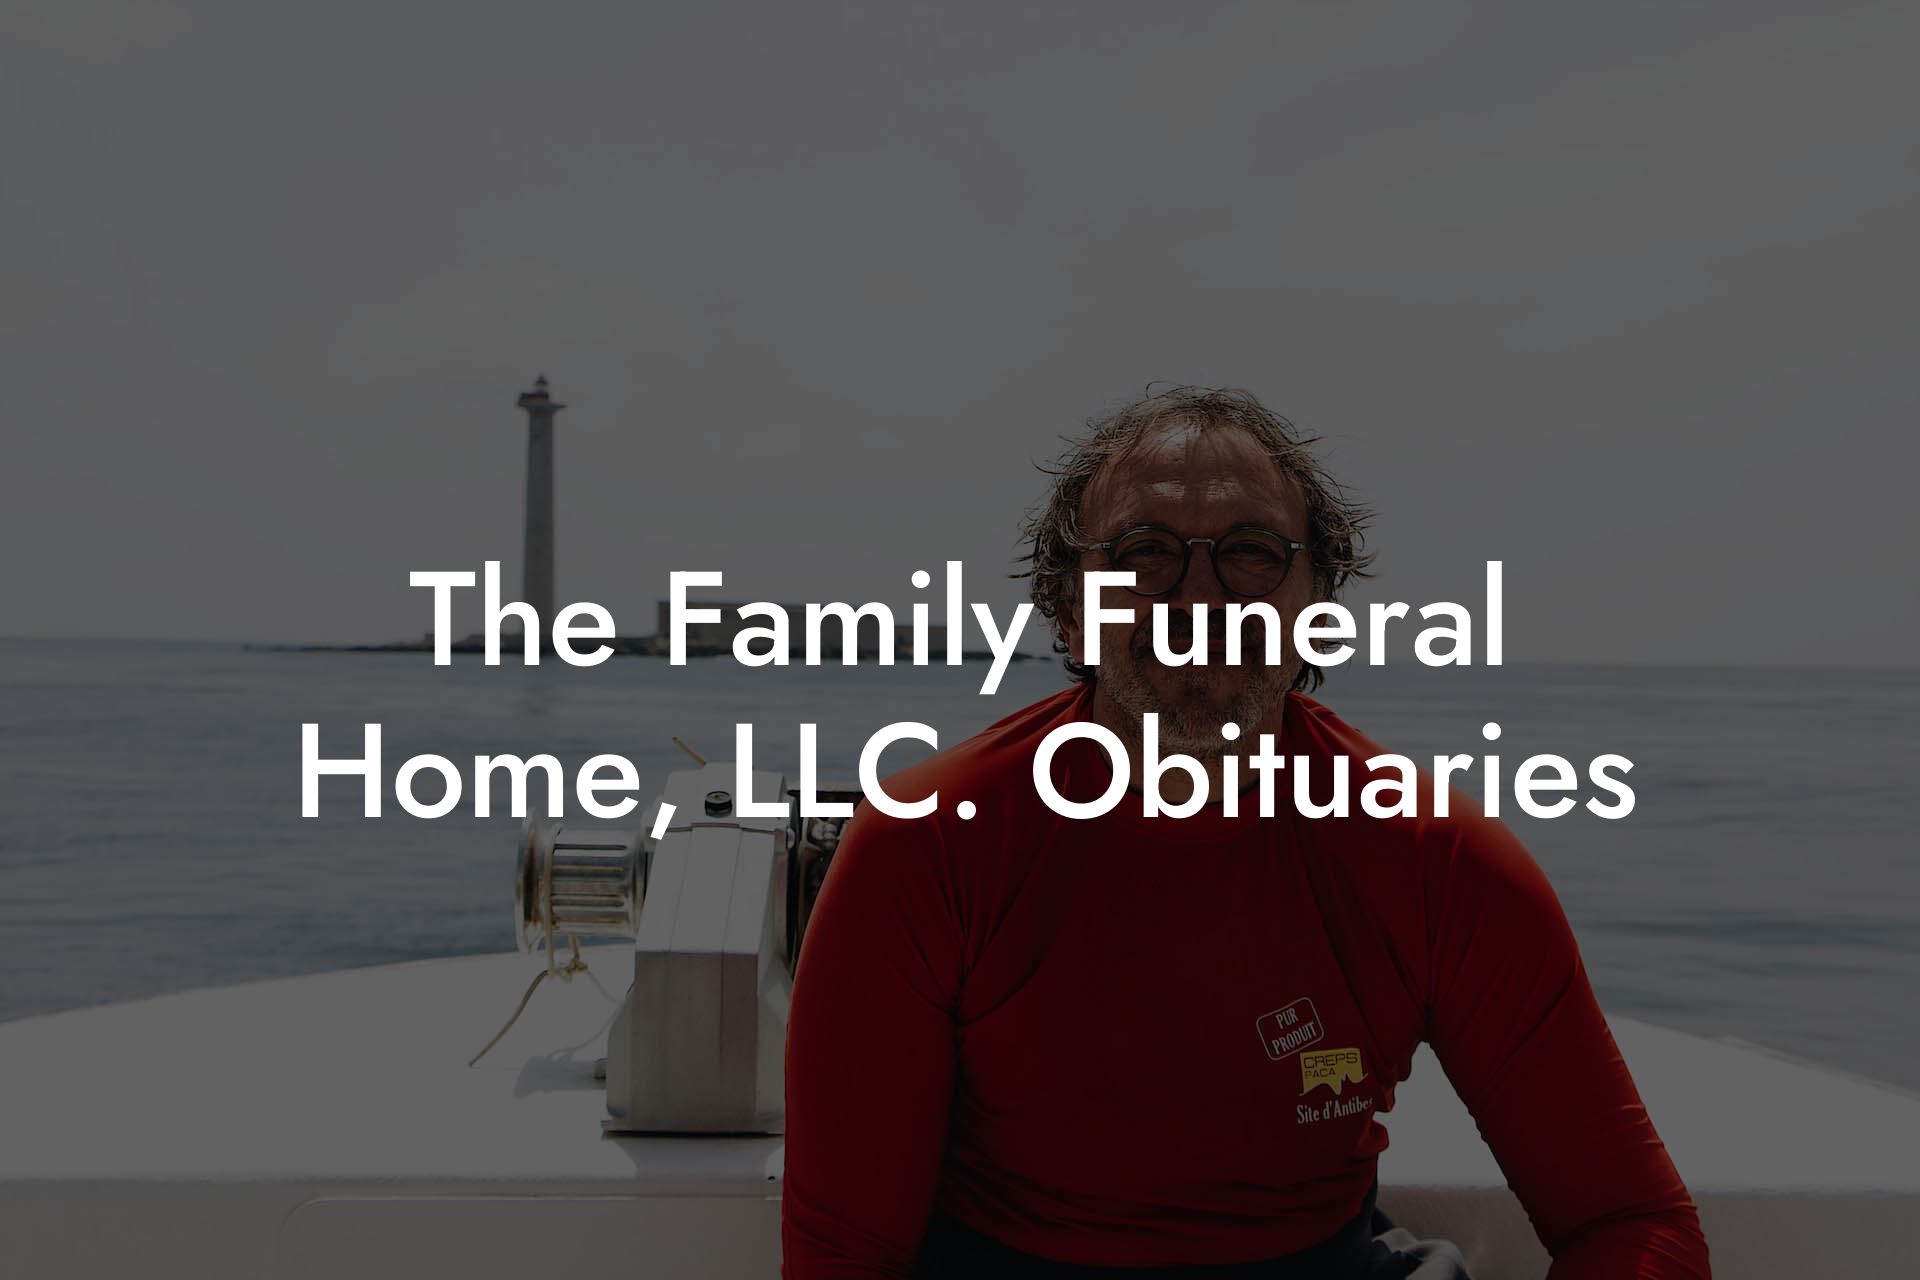 The Family Funeral Home, LLC. Obituaries